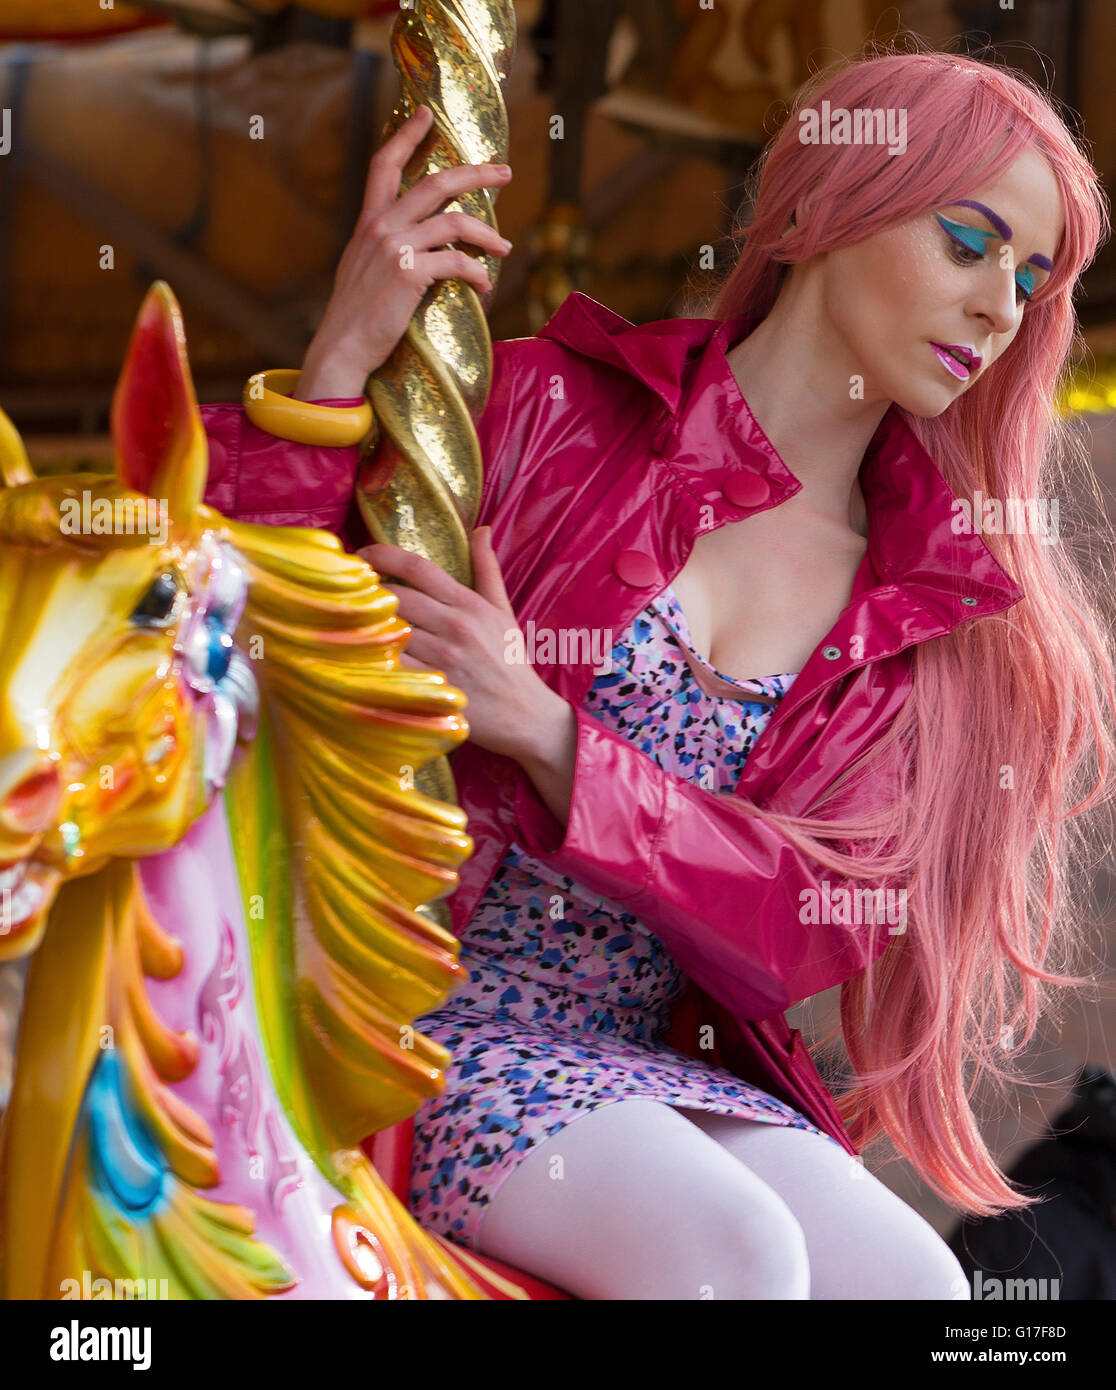 Pink hair model on merry-go-round horse Stock Photo